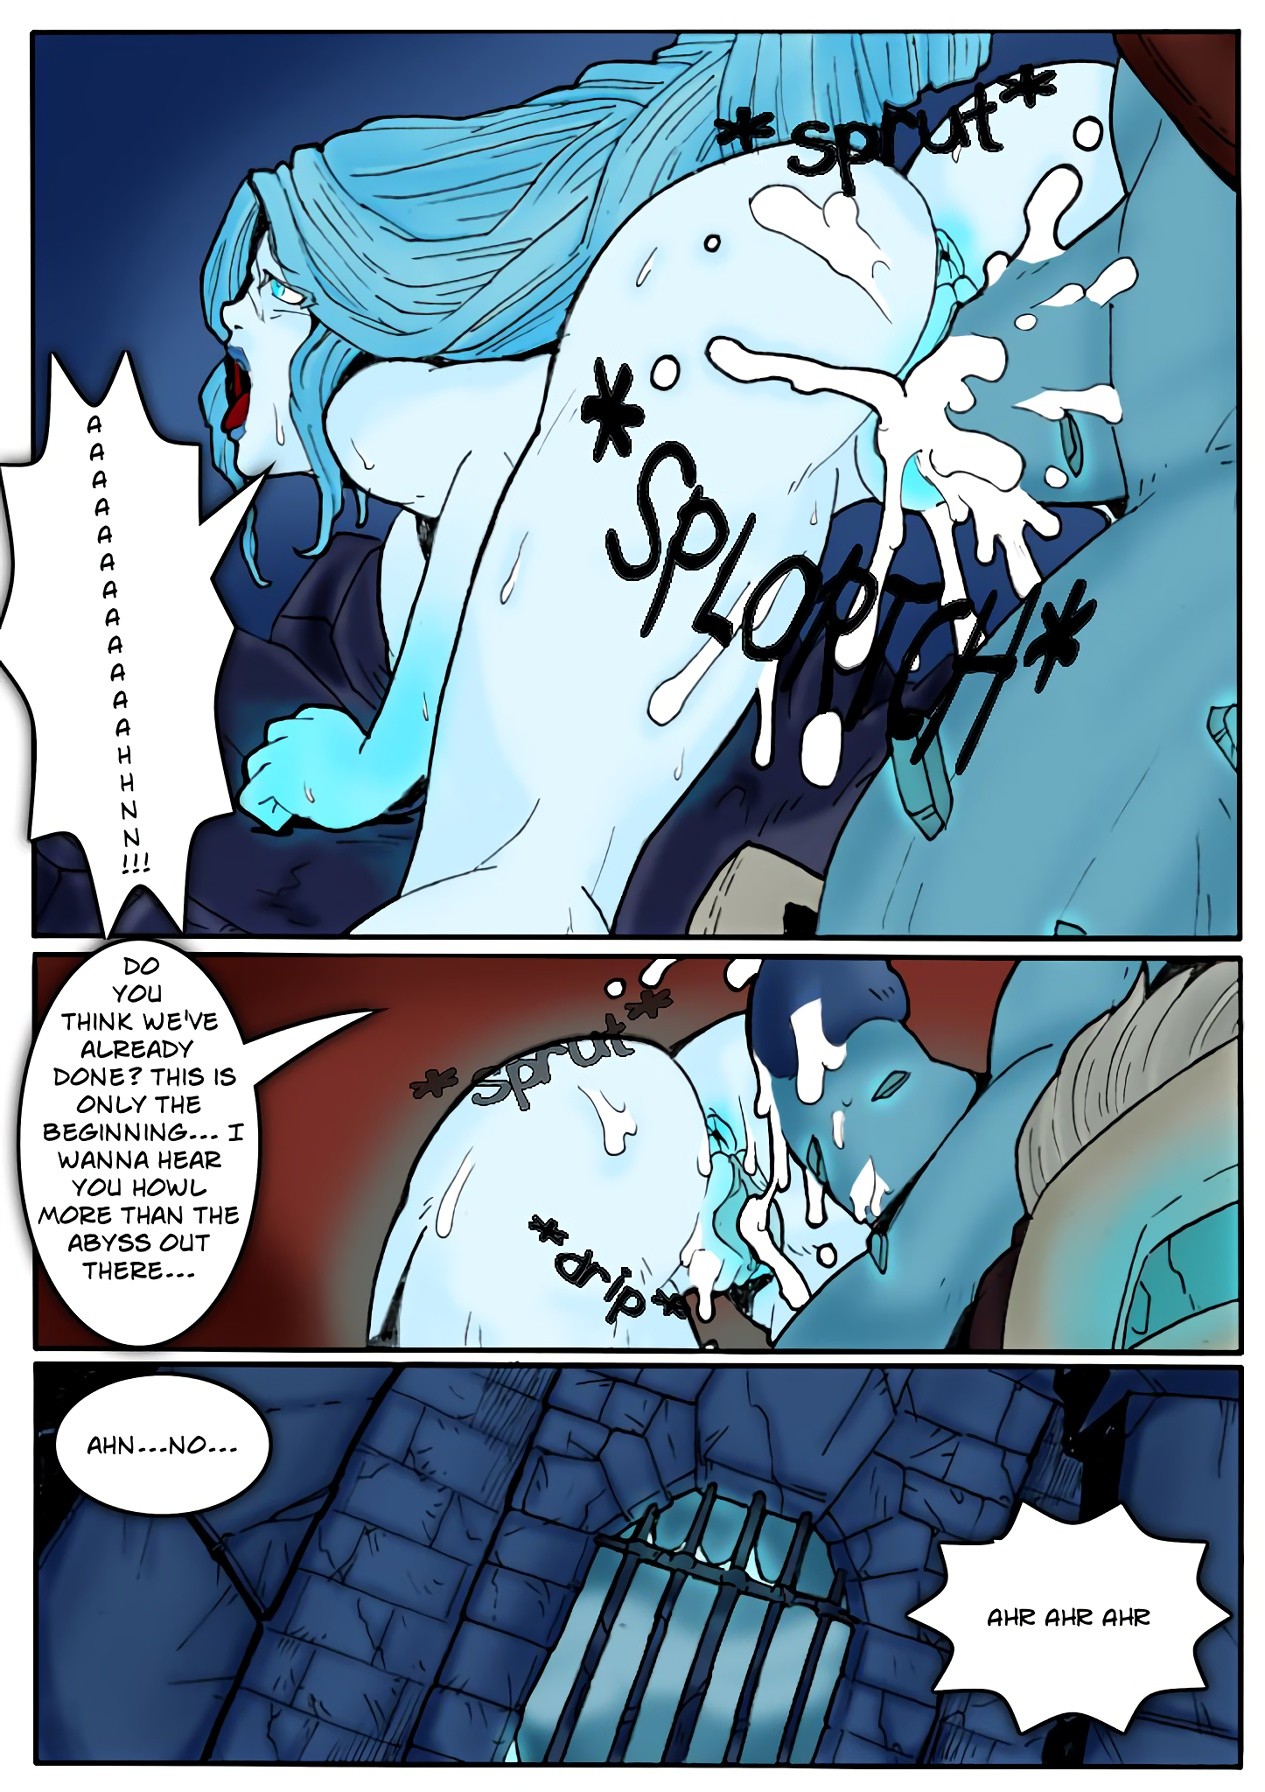 Tales of the Troll King ch. 1 - 3 ] [Colorized] porn comic picture 15